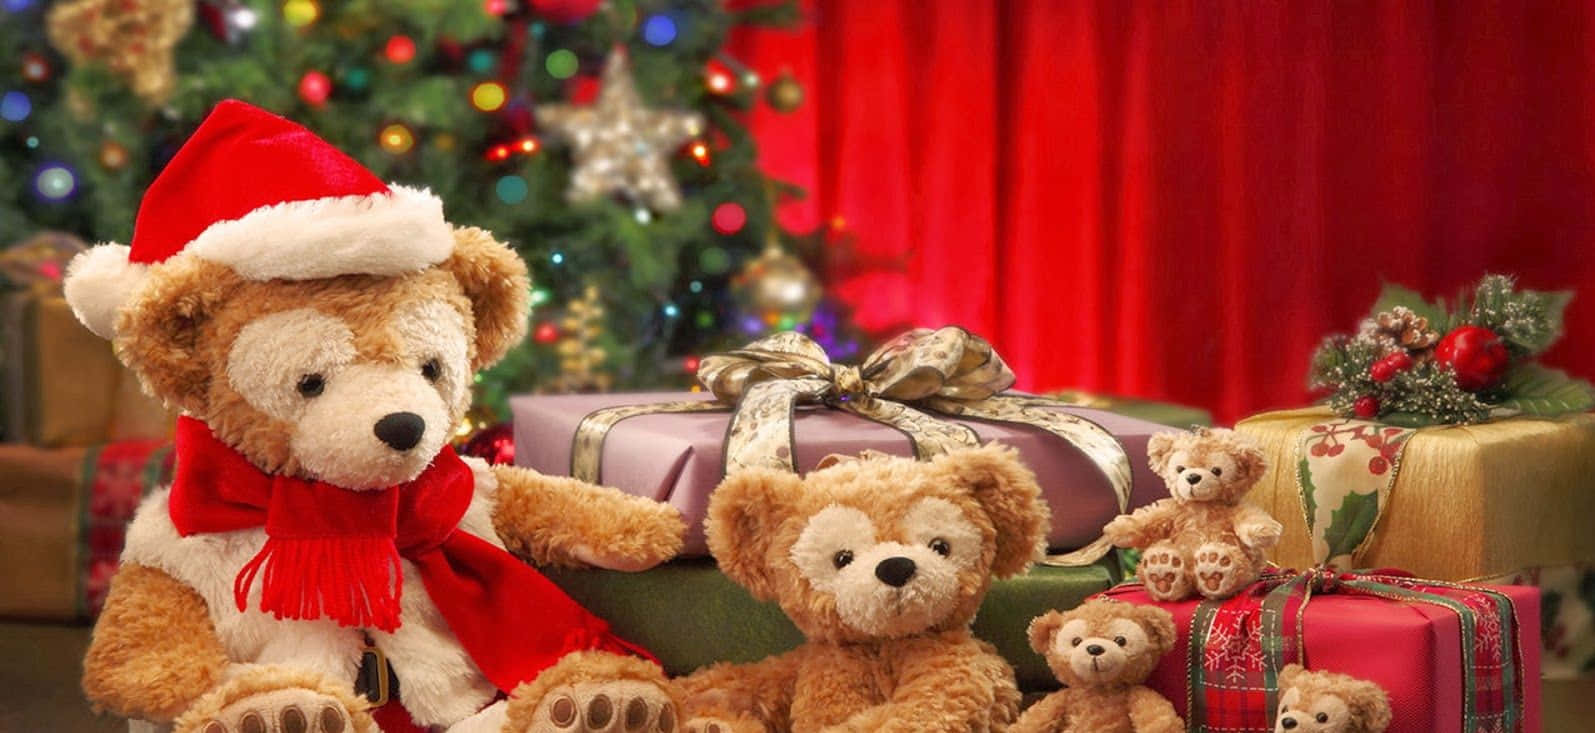 Christmas Family Cute Teddy Bear Presents Pictures